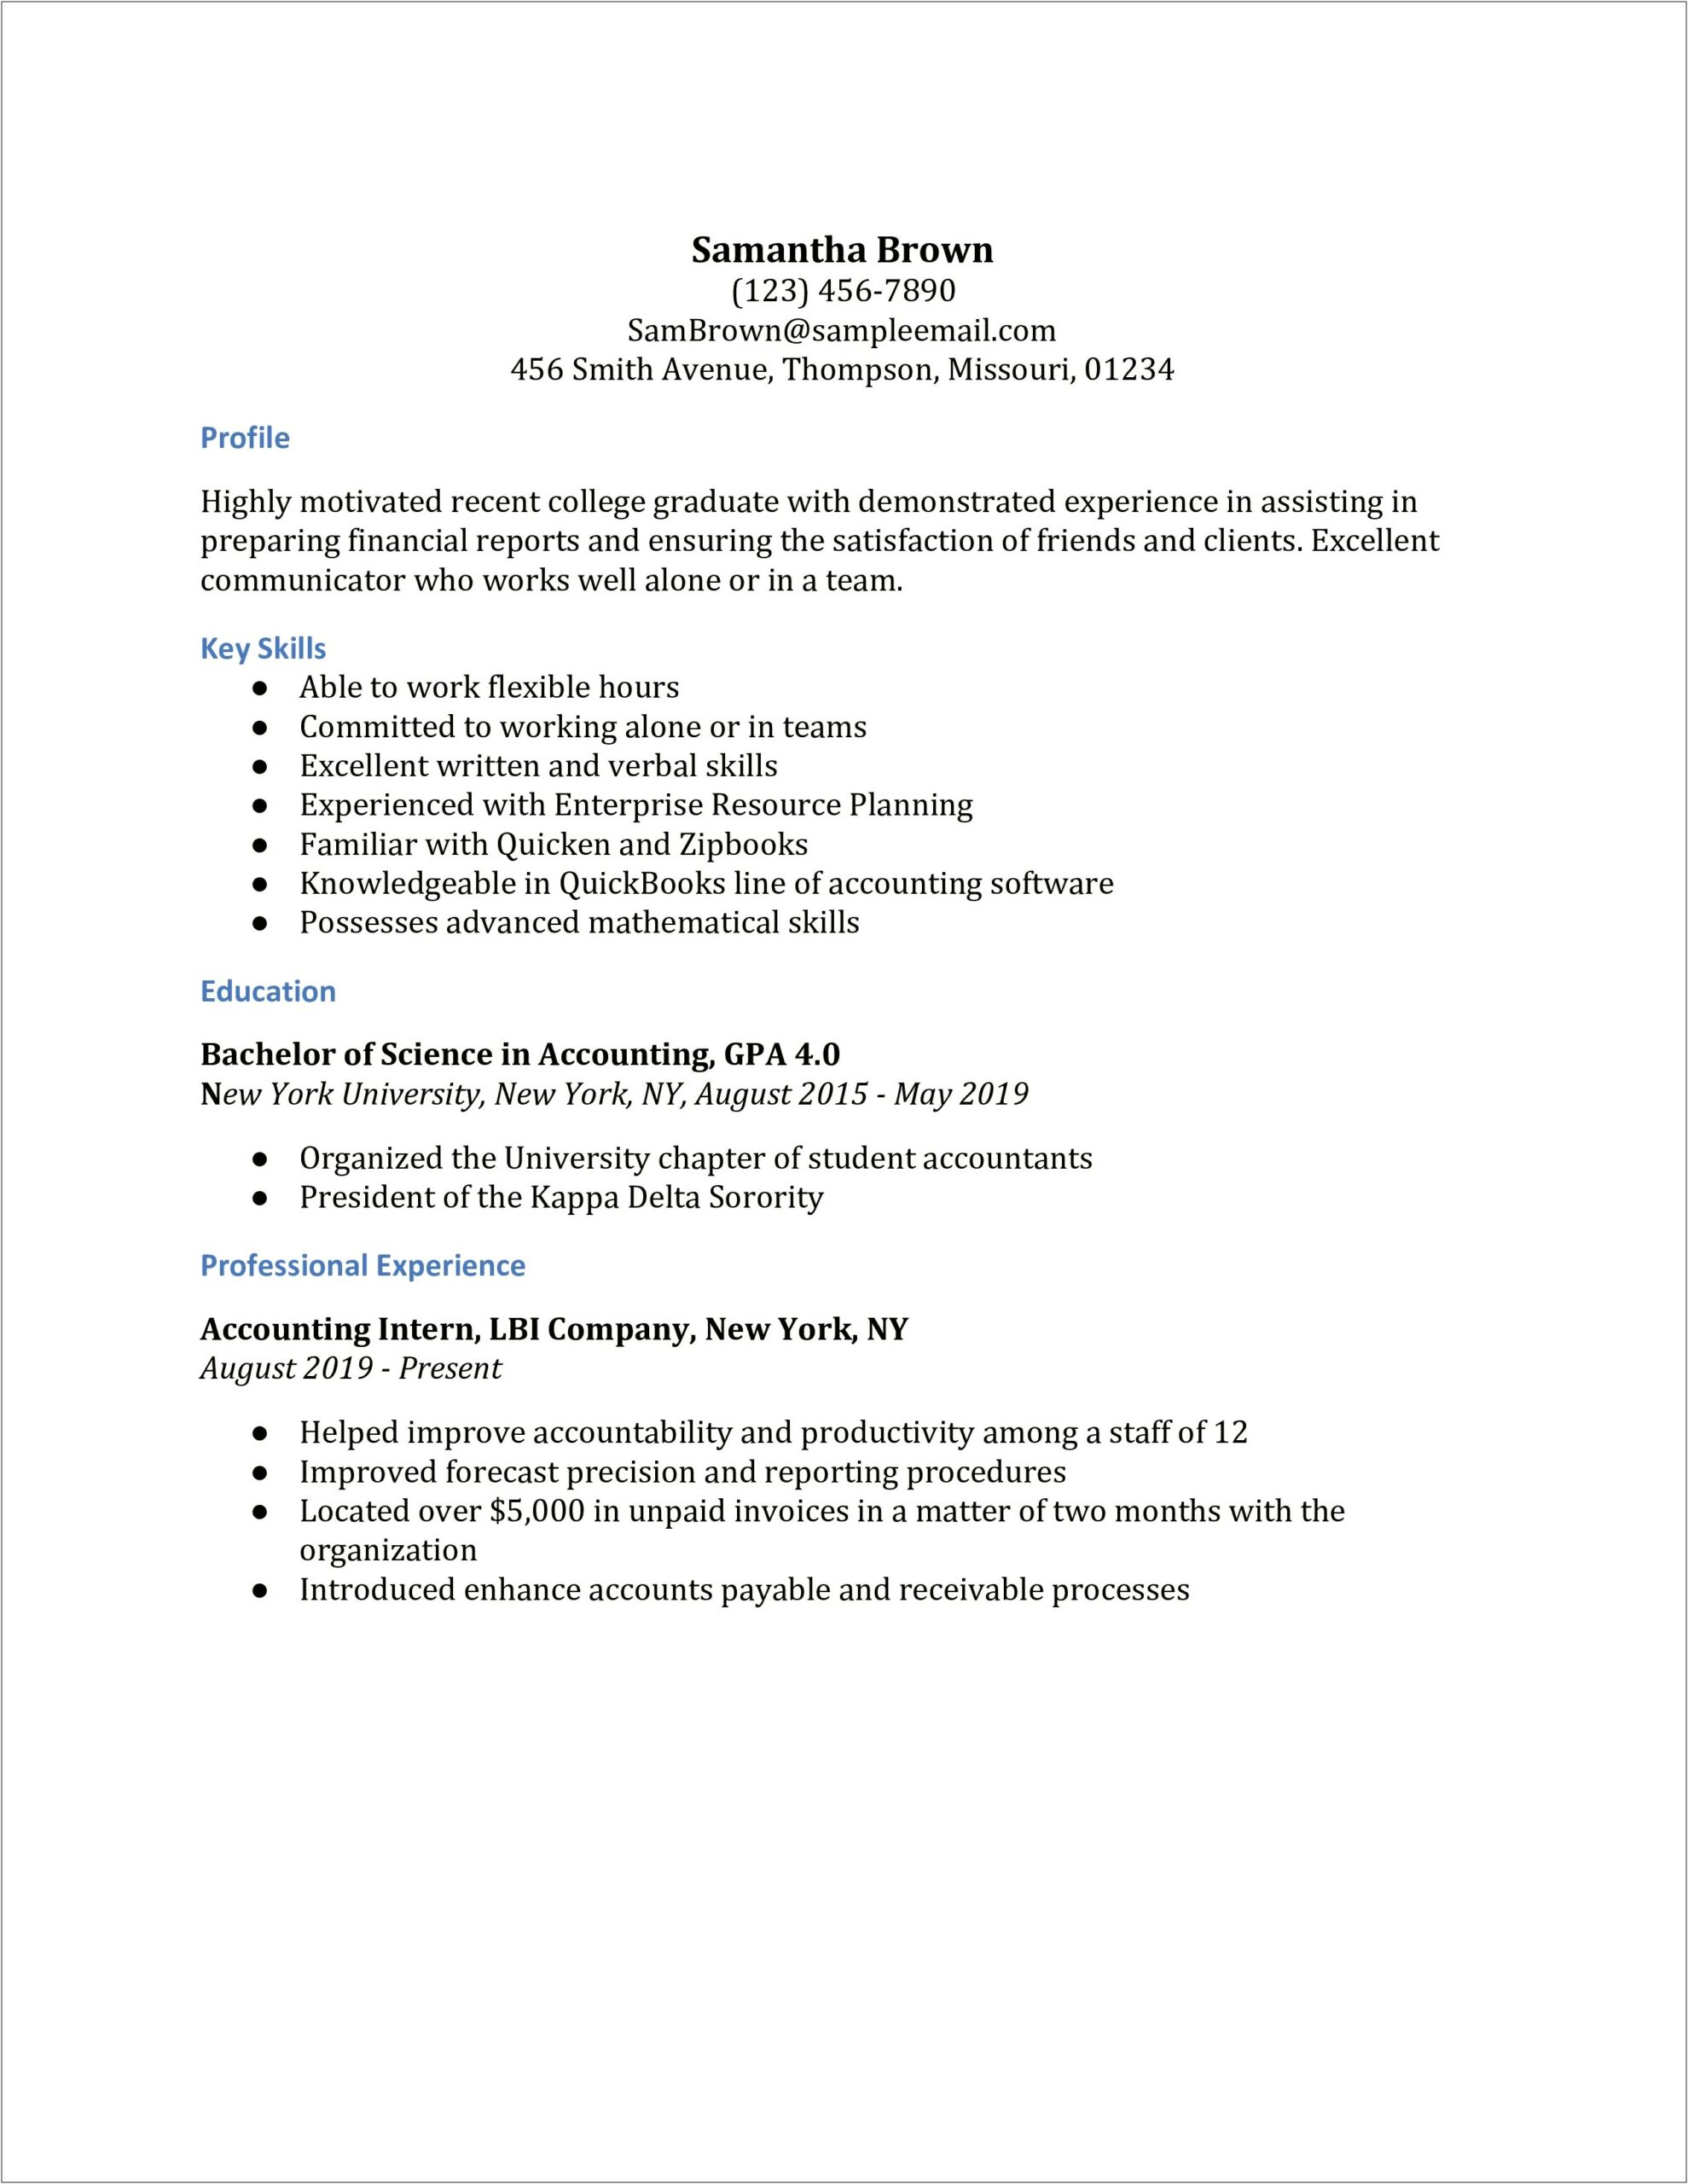 Sample Resume For Someone Working Alone